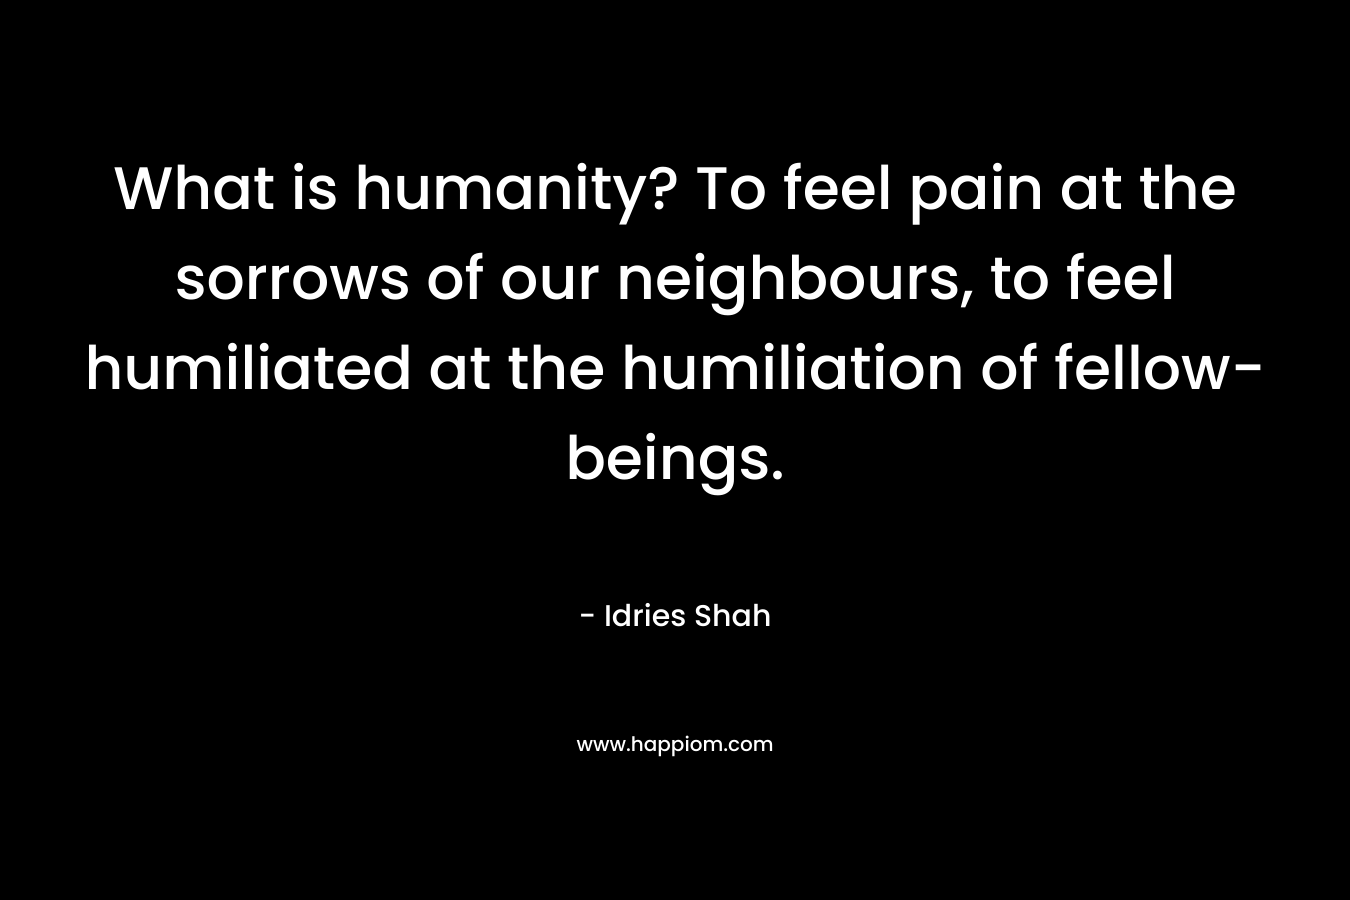 What is humanity? To feel pain at the sorrows of our neighbours, to feel humiliated at the humiliation of fellow-beings. – Idries Shah